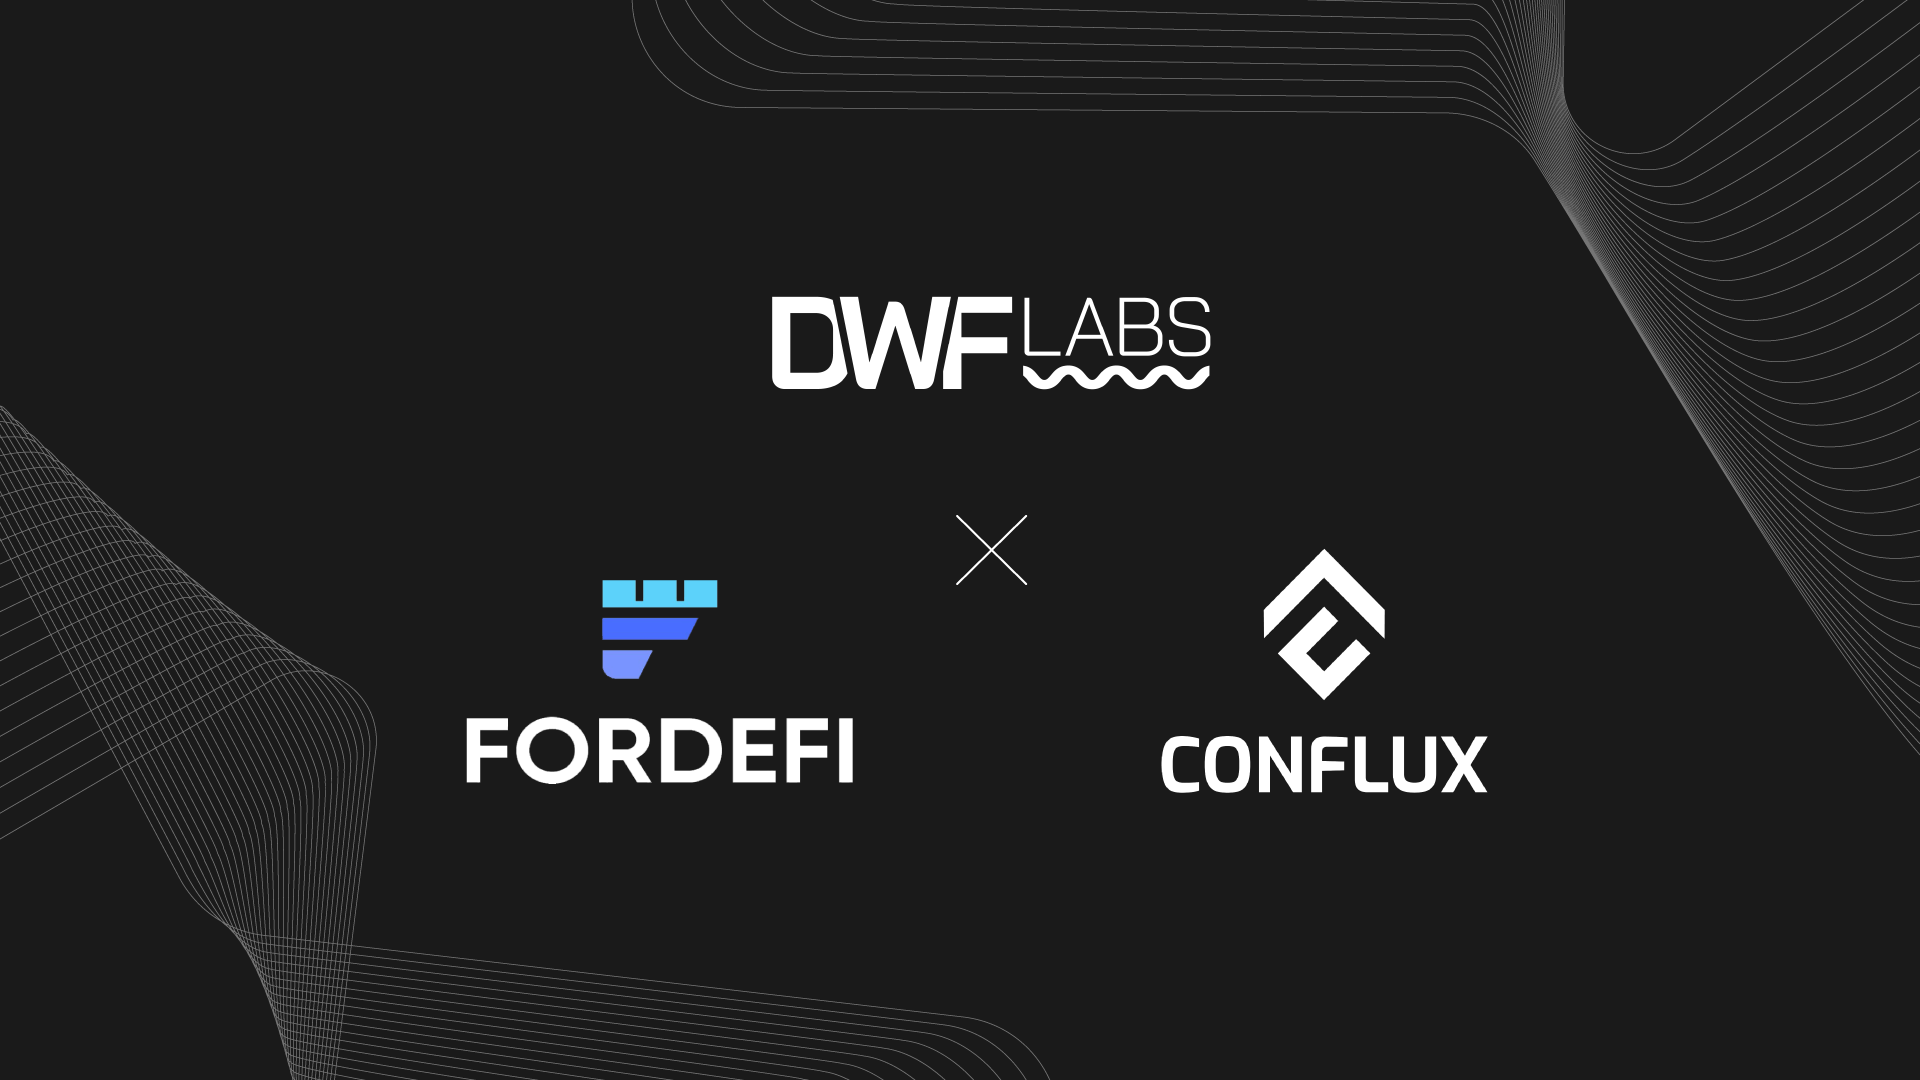 Fordefi Welcomes Conflux Network and DWF Labs to Its Institutional-Grade Platform in a Milestone Integration